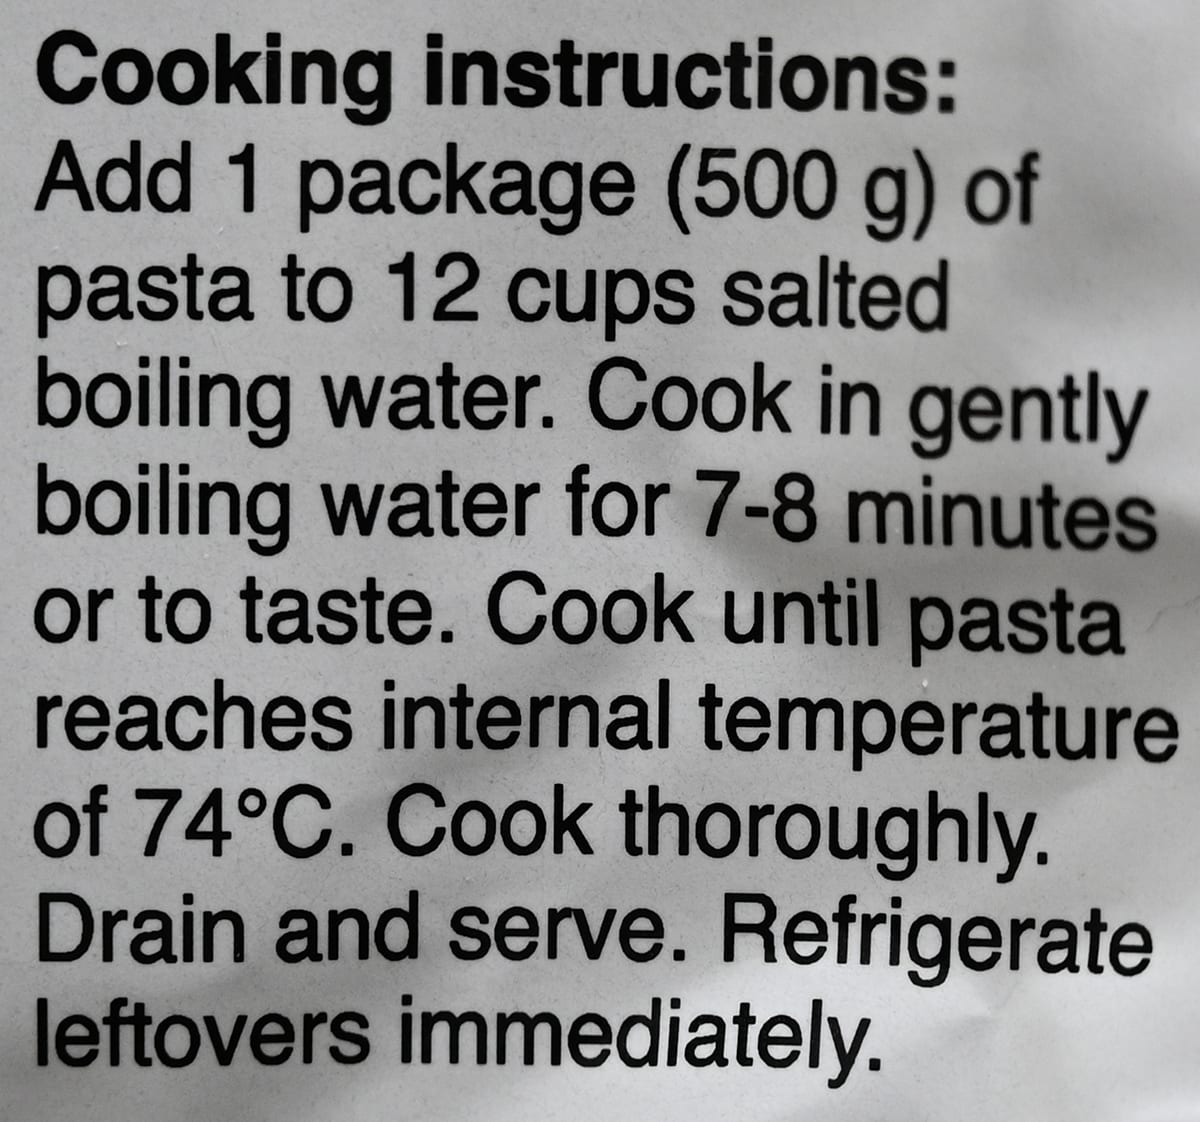 Image of the cooking instructions for the tortelloni.